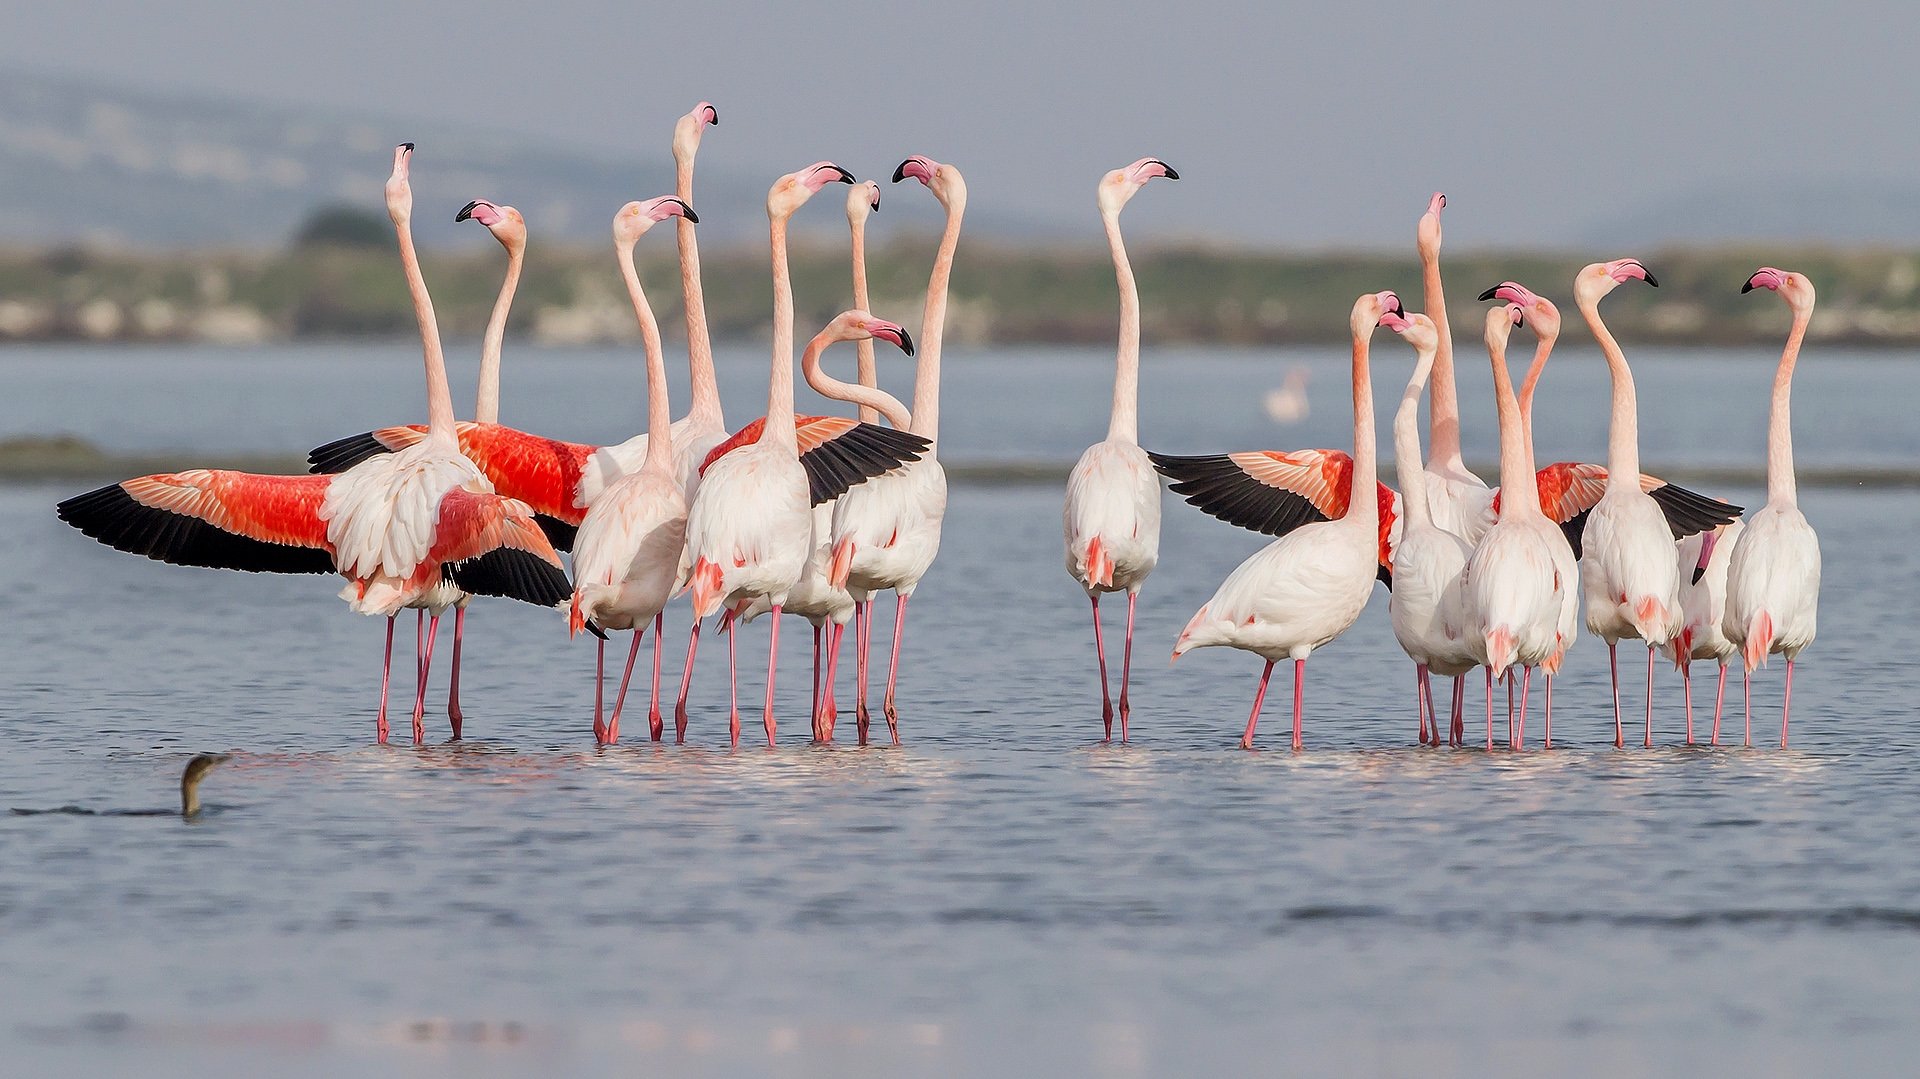 Gediz Delta is home to approximately 10% of the world's flamingo population.